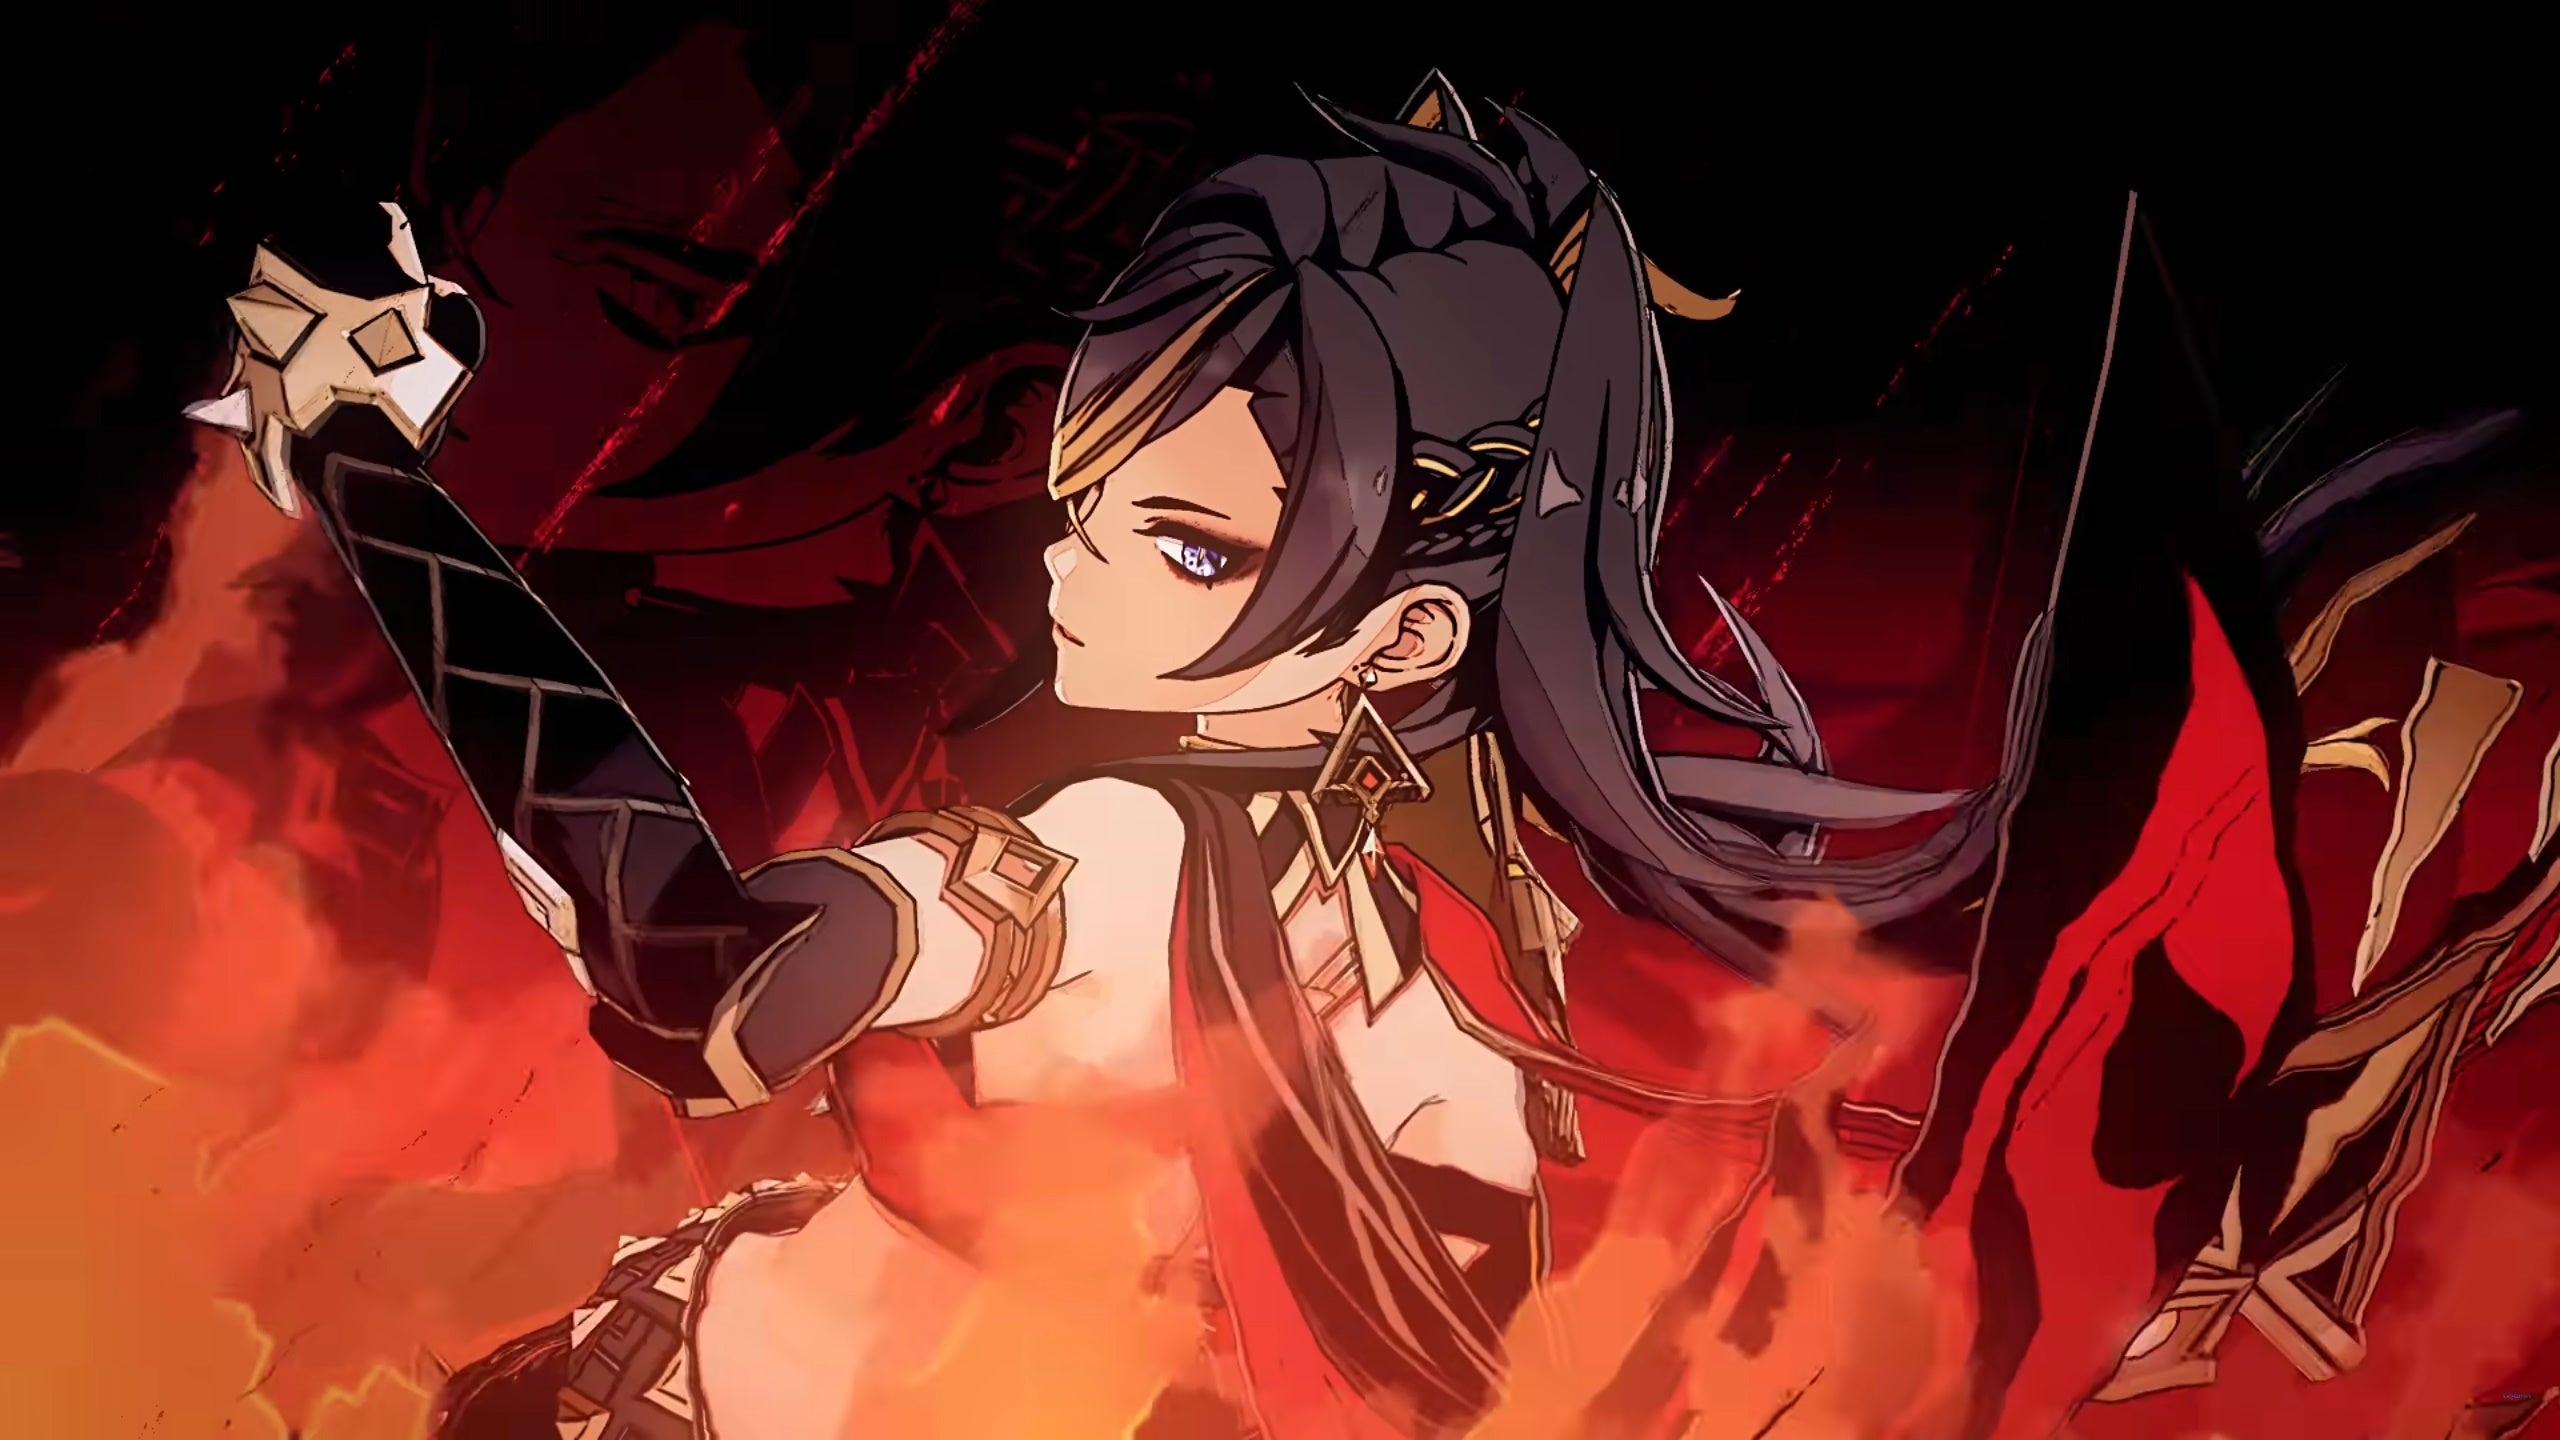 Genshin Impact Dehya build: An anime woman with long brown hair and cat ears is standing amid a blaze of flames. She's turned sideways as if gearing up for a mighty punch